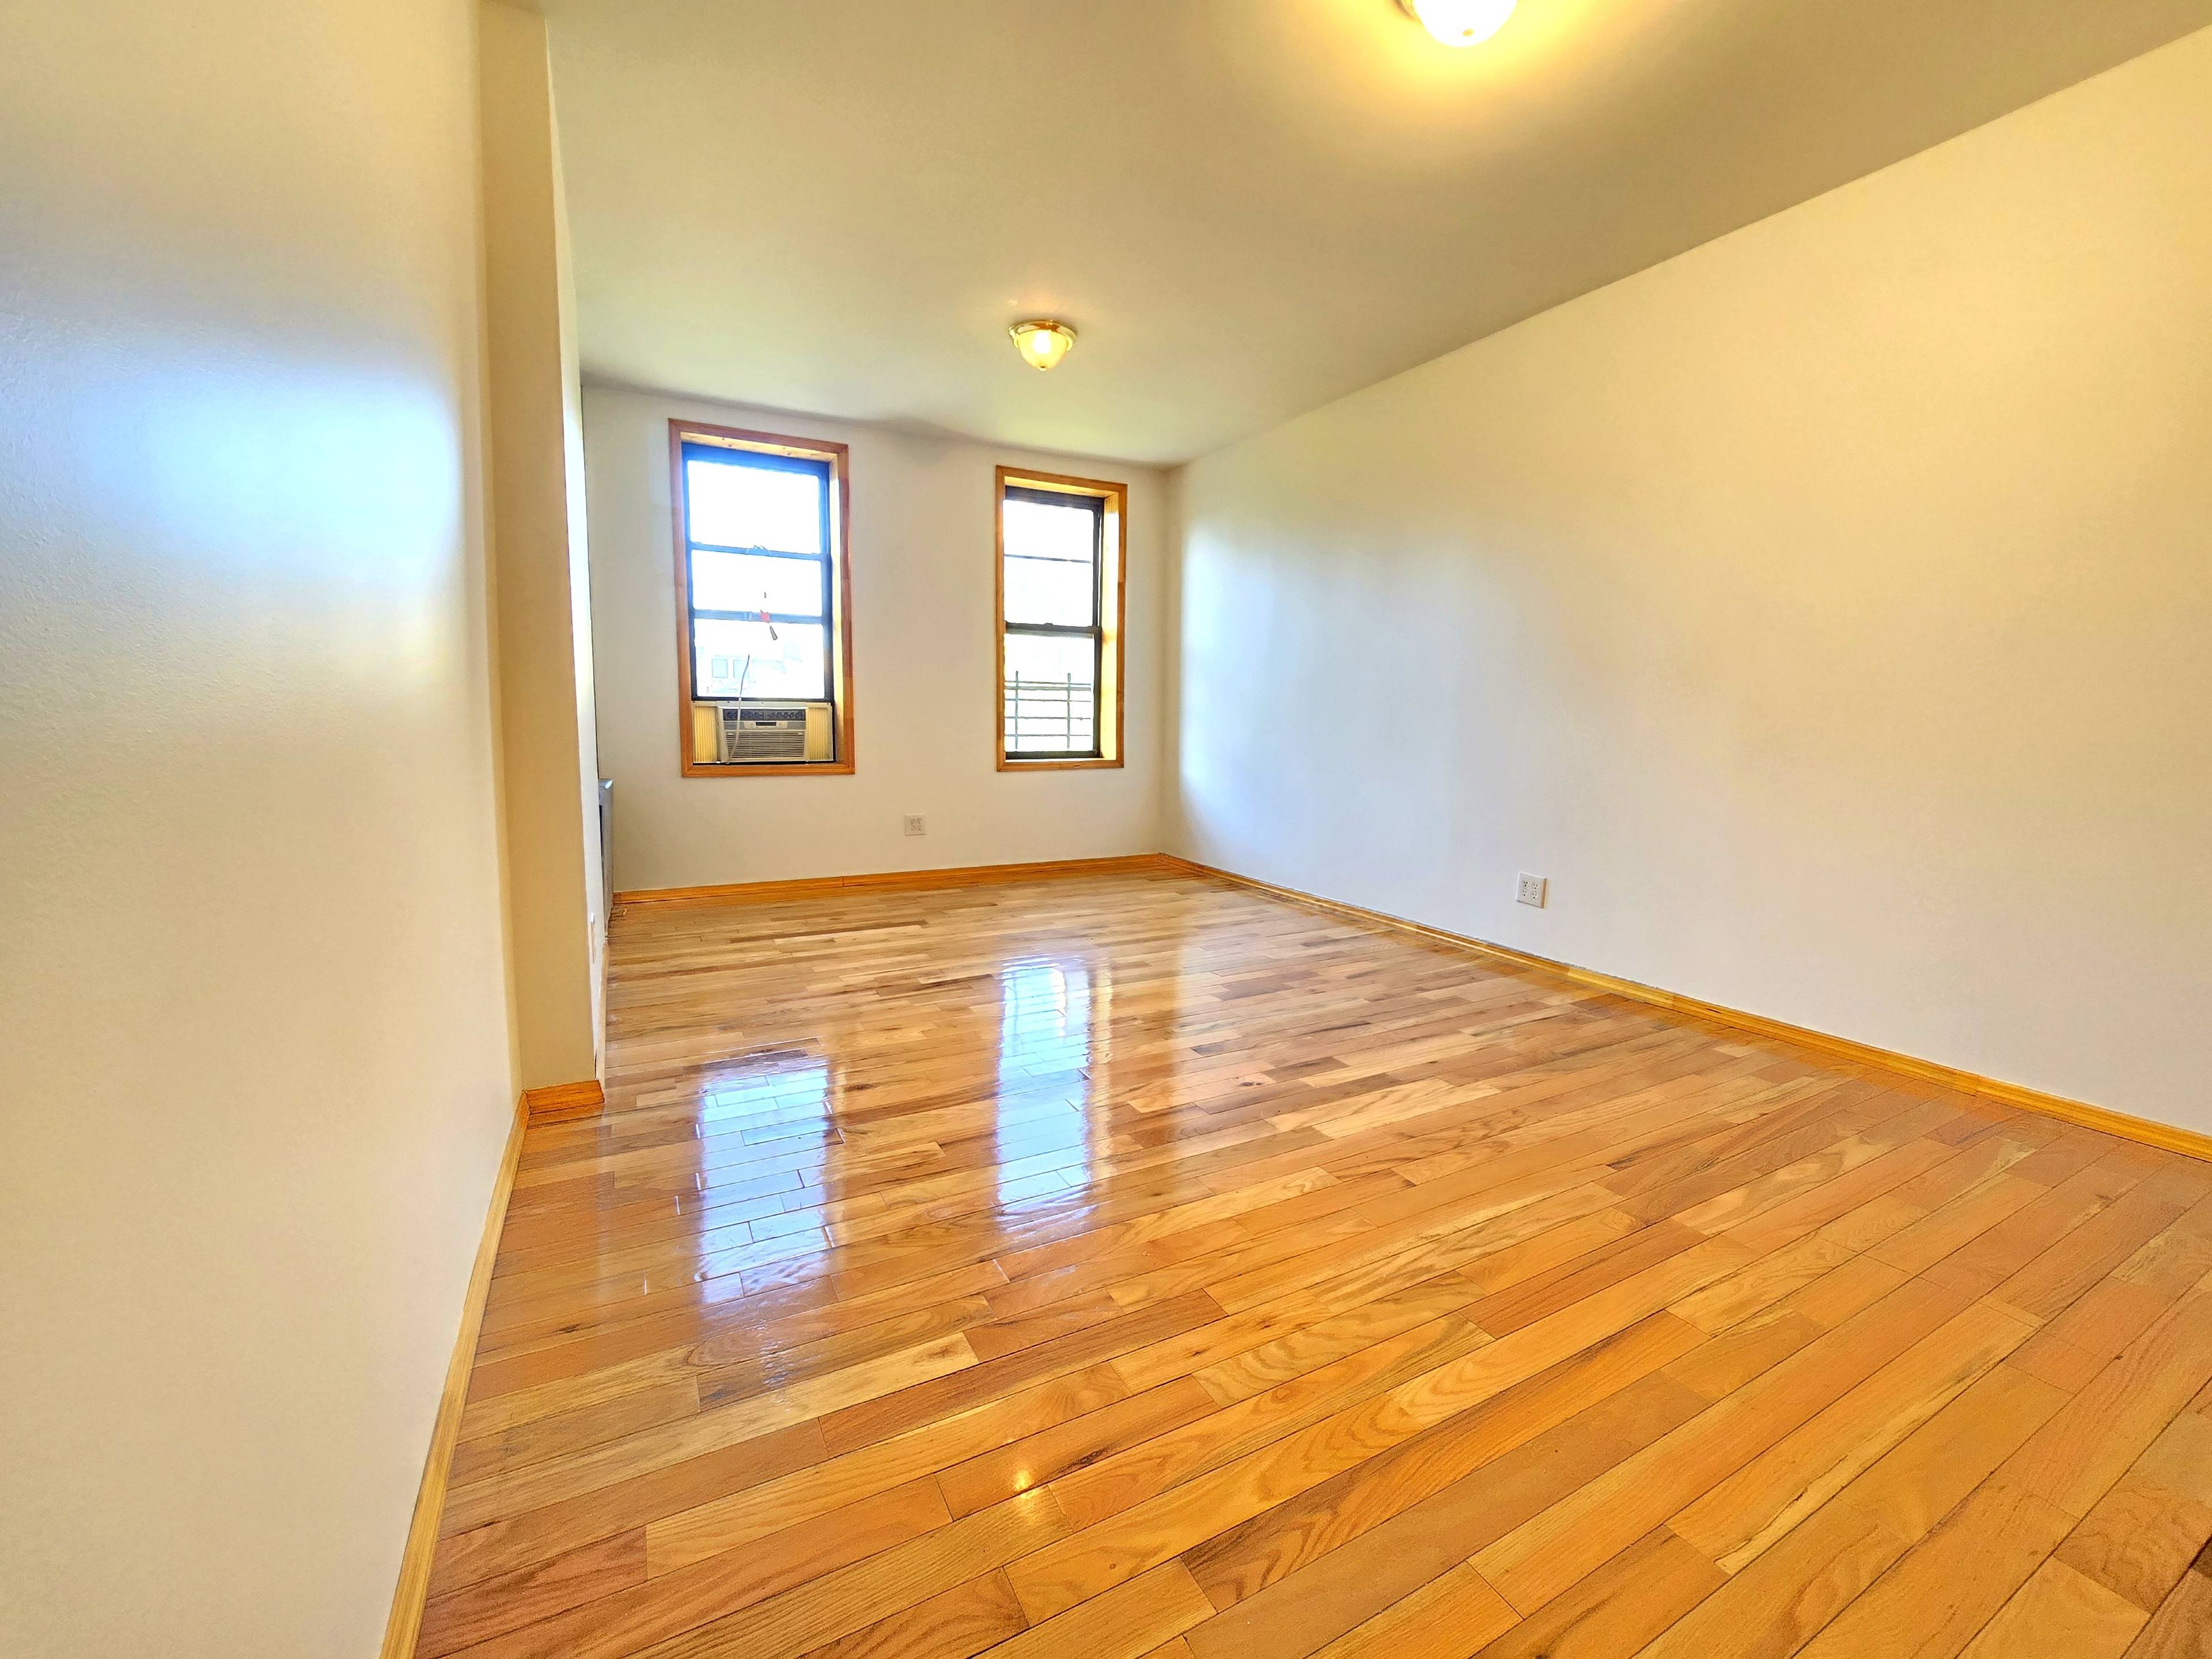 Our thoughts... Available for move in as early as May 1st, this spacious 2 bedroom apartment at 176 Kent Street in Greenpoint, Brooklyn, offers ample living space and convenient features.